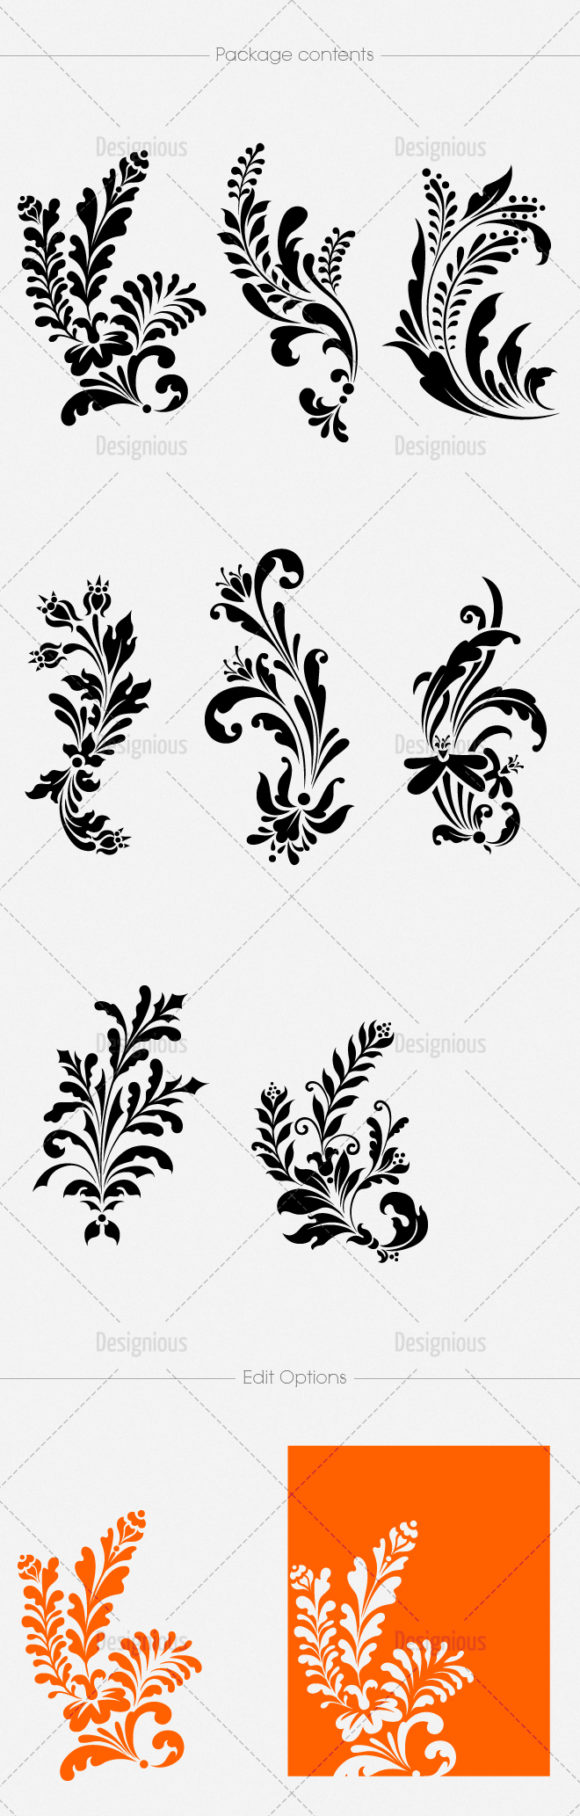 Floral Vector Pack 119 2